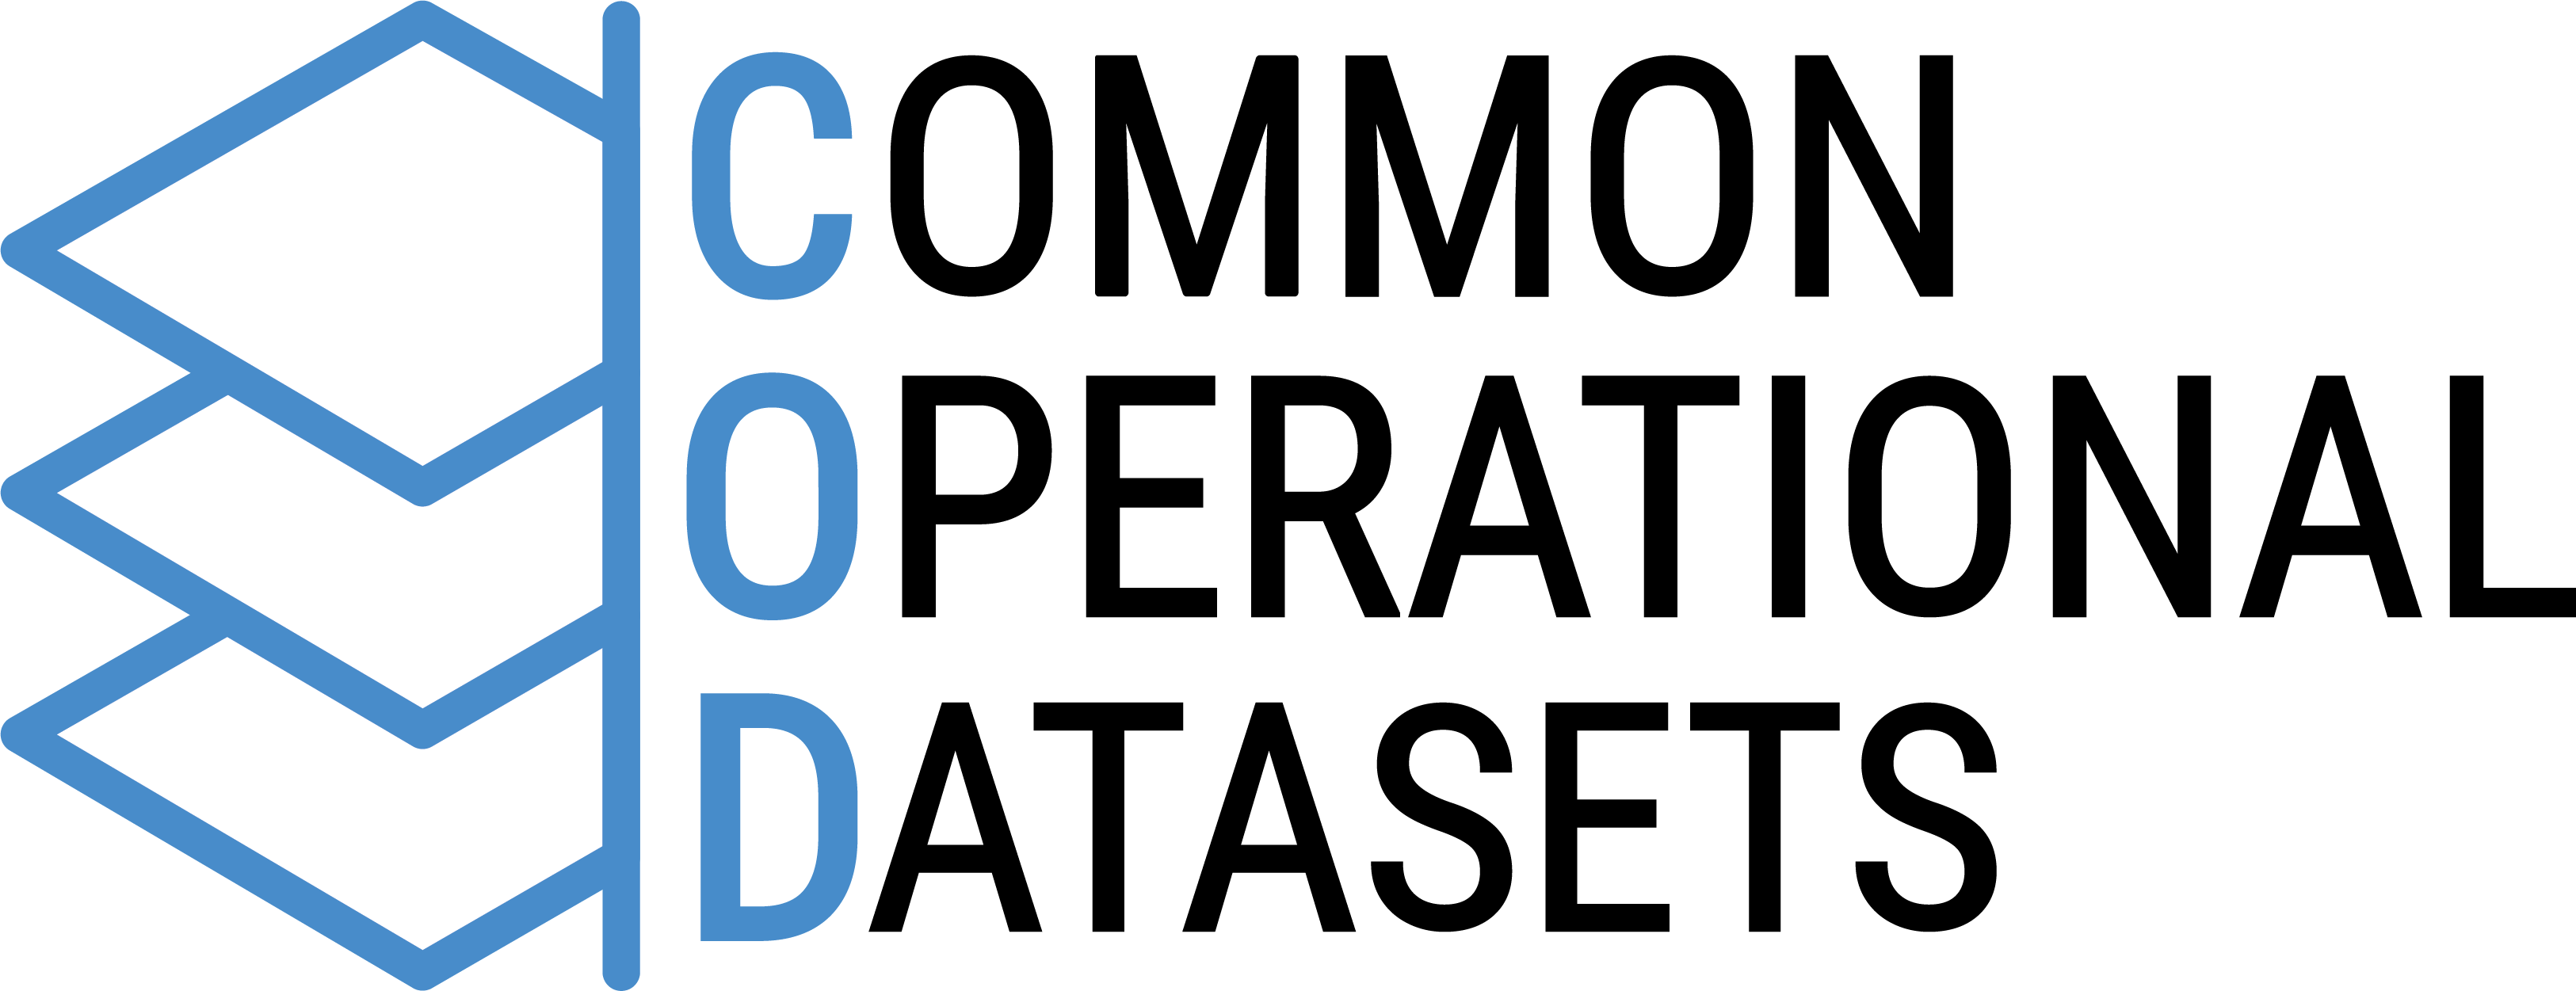 Common Operational Datasets